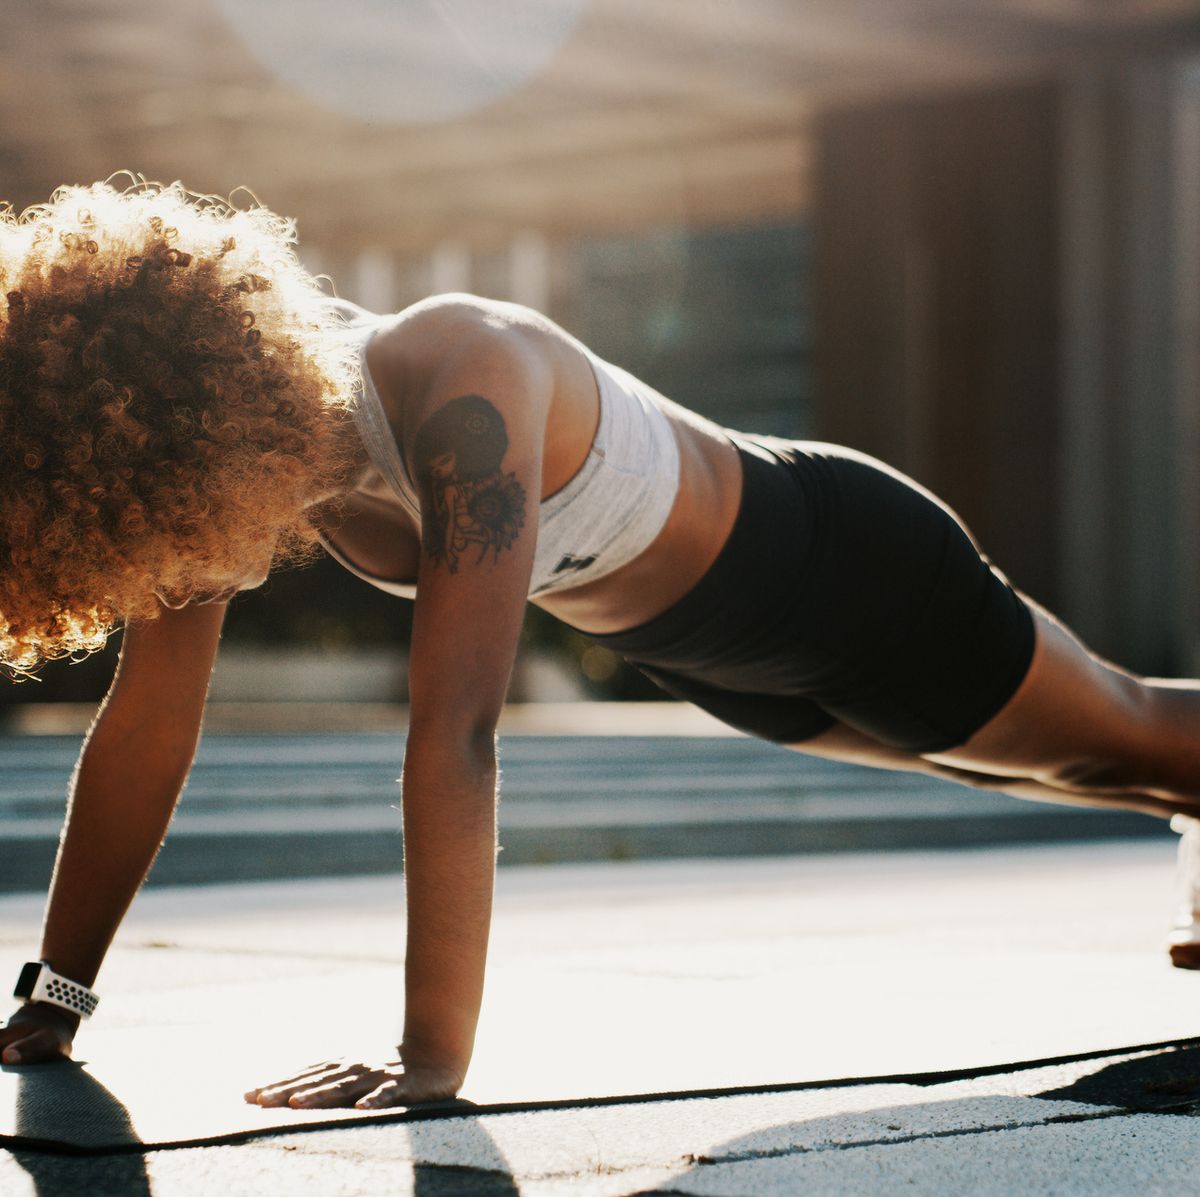 This Is Why You Aren't Getting Better at Push-Ups